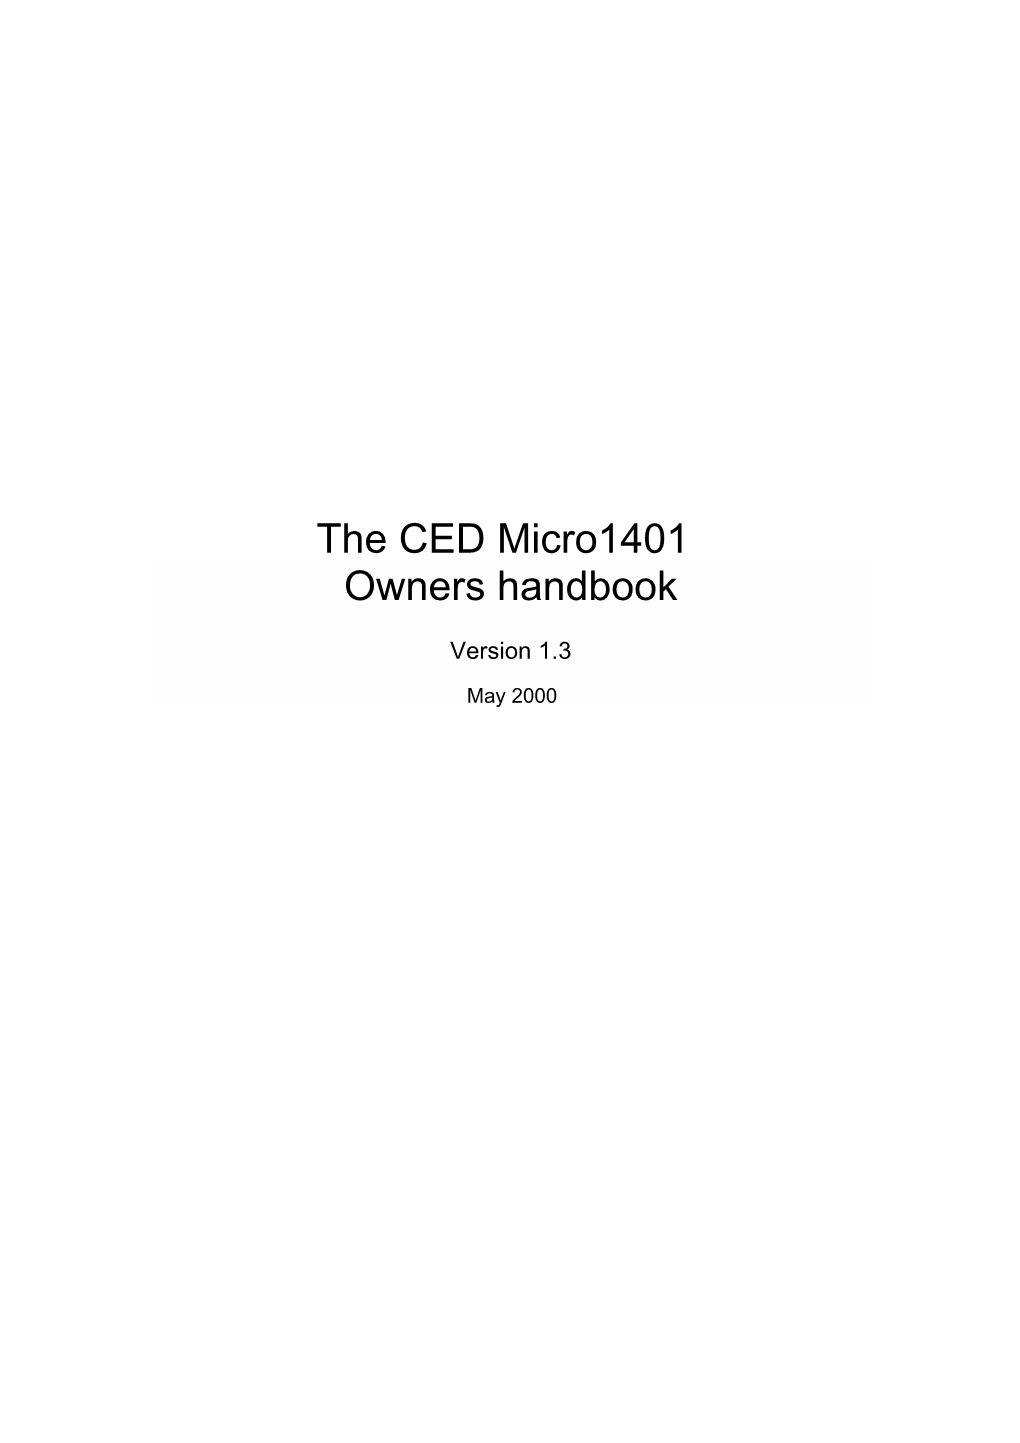 The CED Micro1401 Owners Handbook